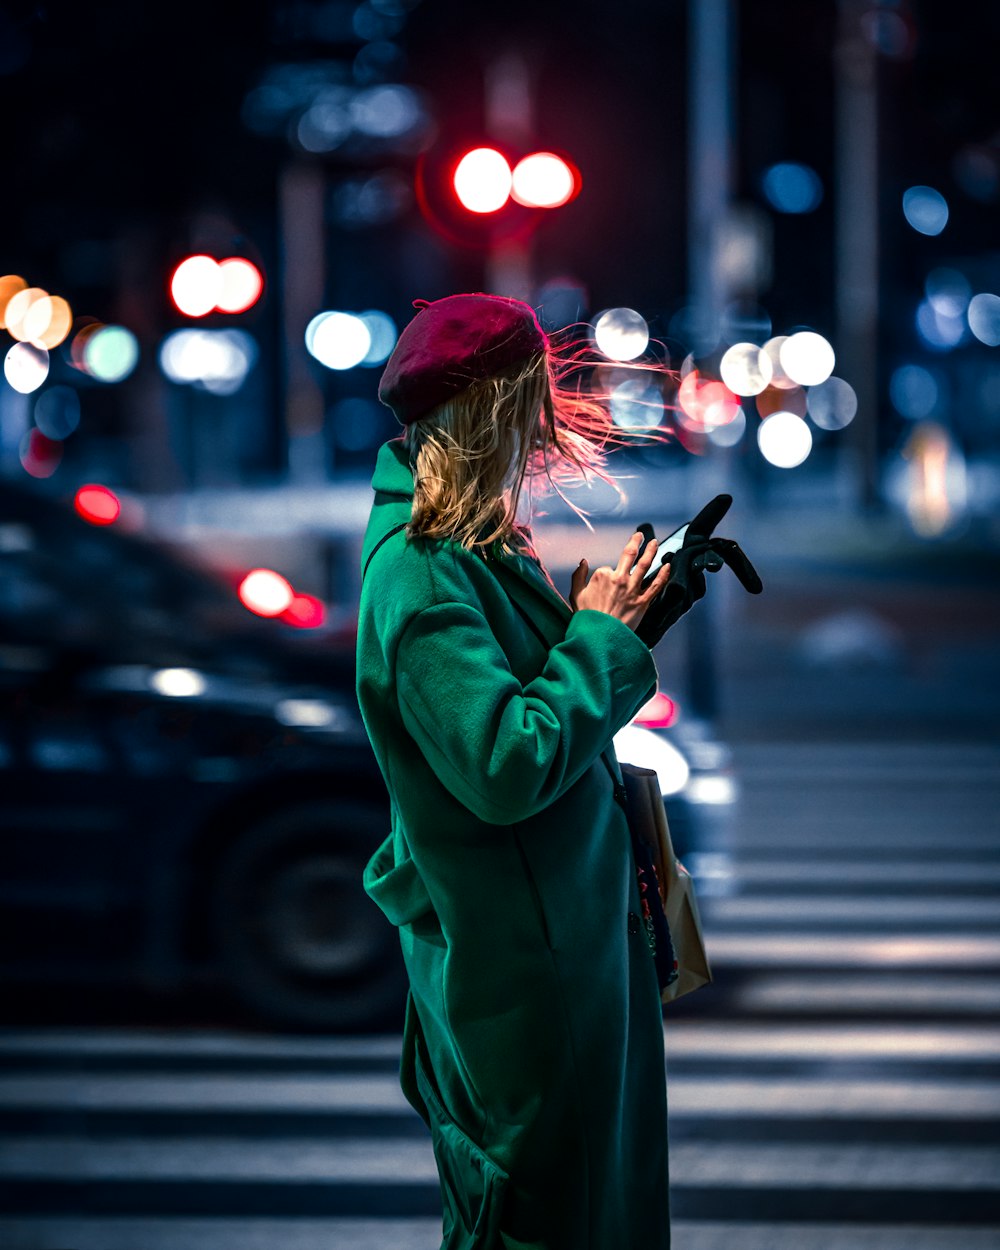 a woman in a green coat is using her cell phone